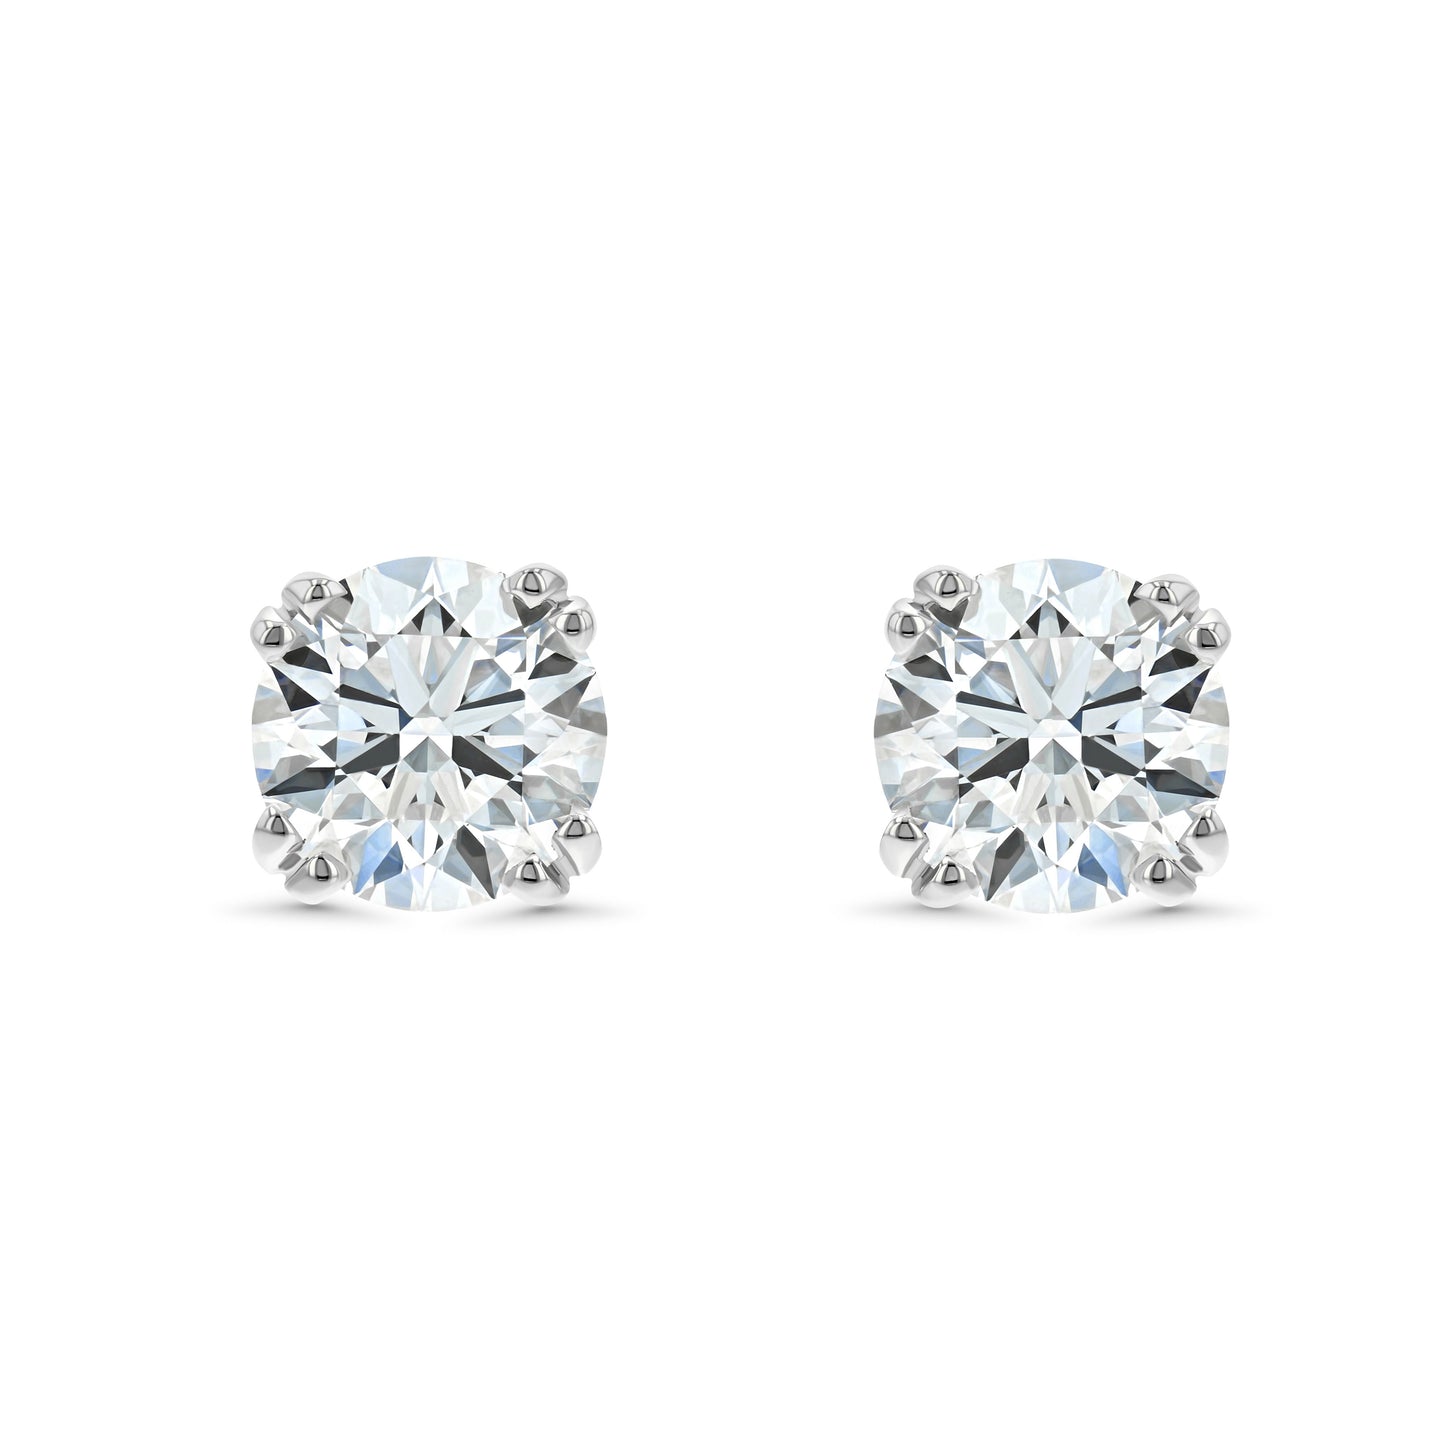 14k White Gold Double Prong Round Diamond Stud Earrings 1ctw (5.2mm Ea), G Color, Si3 Clarity